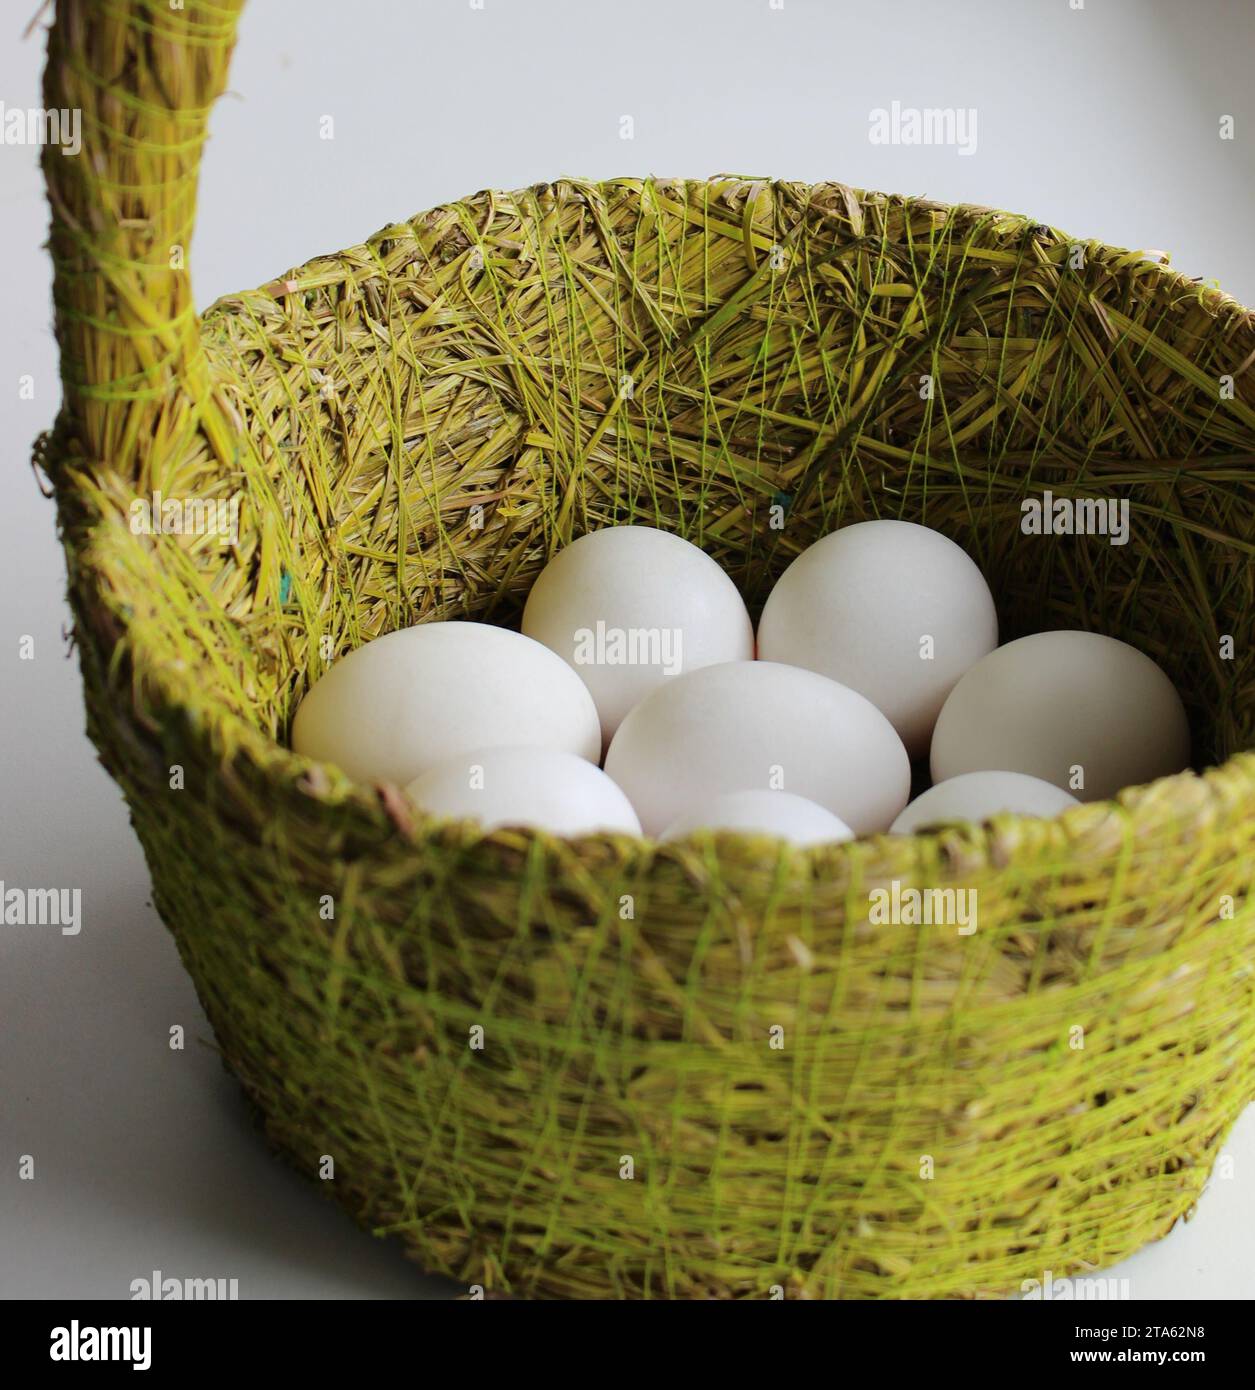 Woven Basket With Grass Fibers With White Whole Chicken Eggs Stock Photo